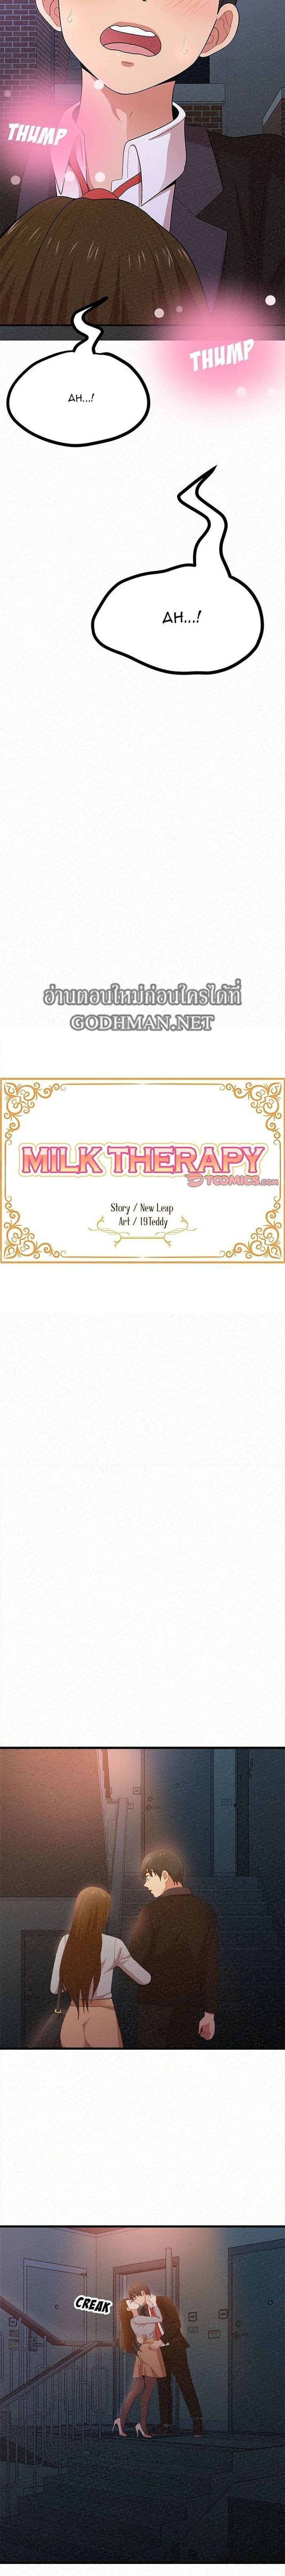 Milk Therapy